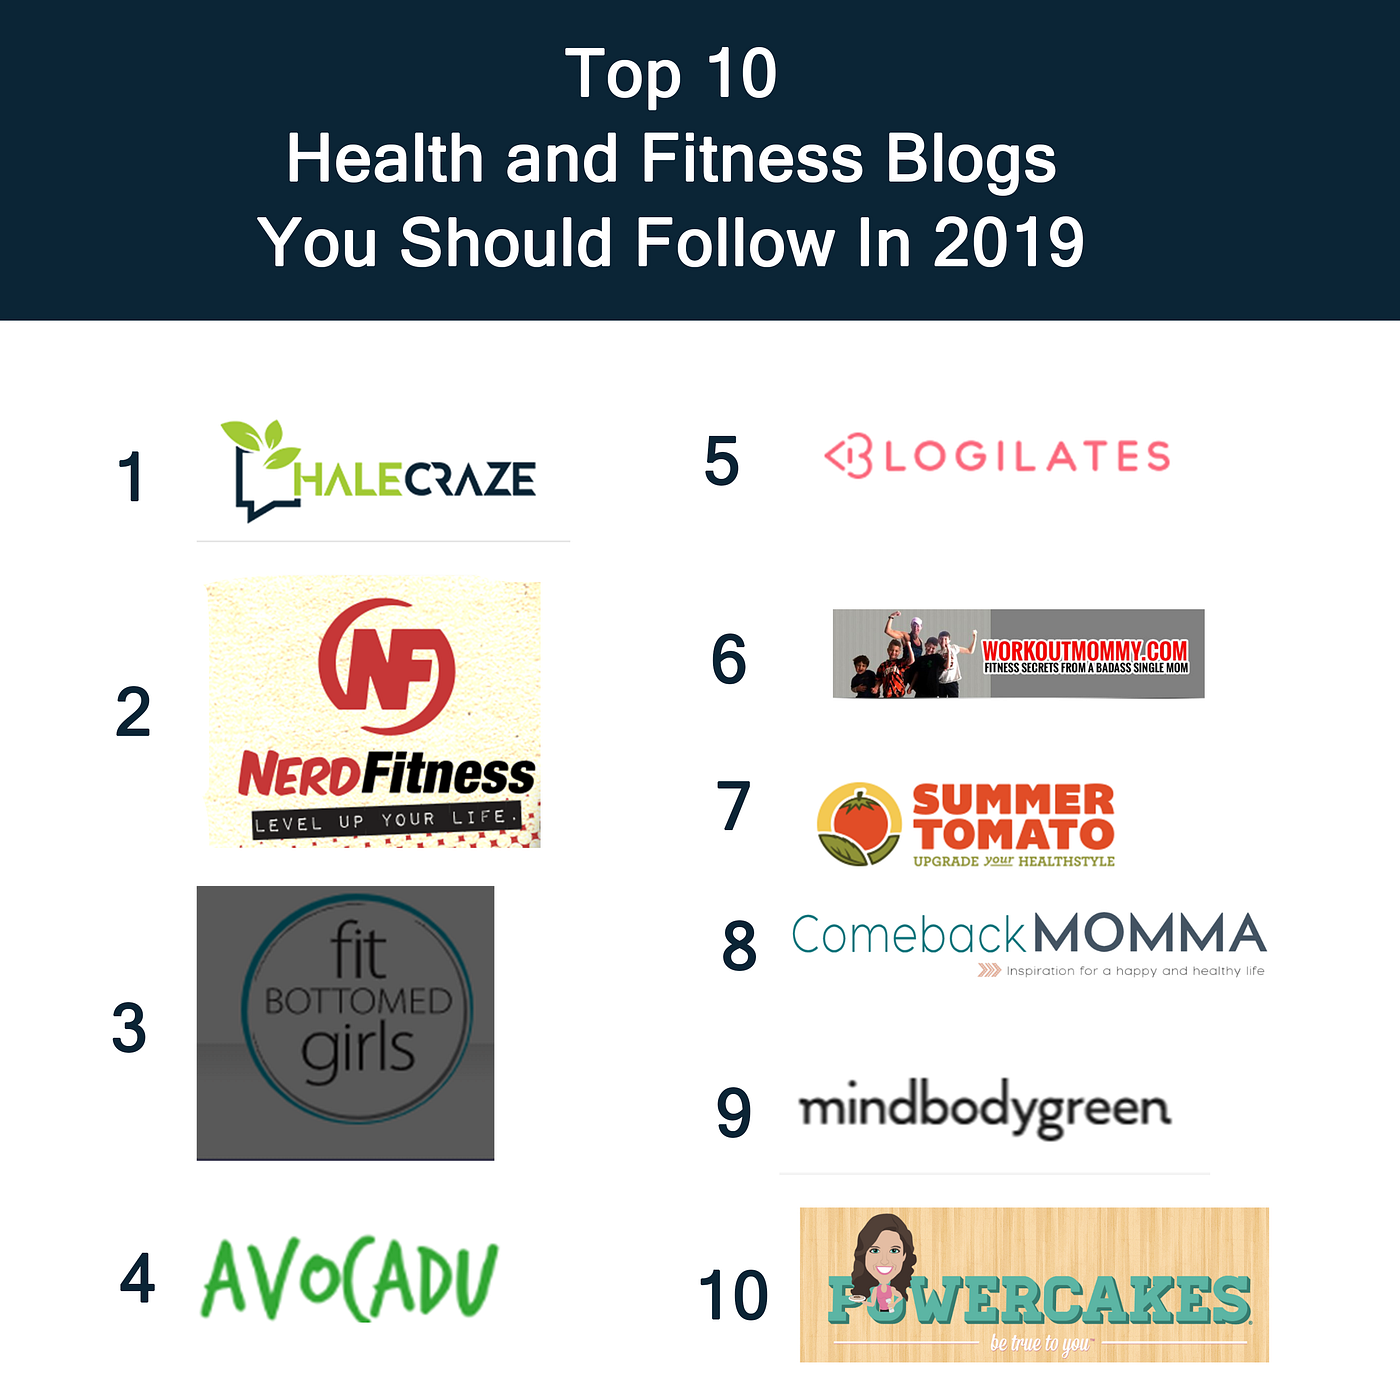 Top 10 Health and Fitness Blogs You Should Follow In 2019 | by John nik |  Medium